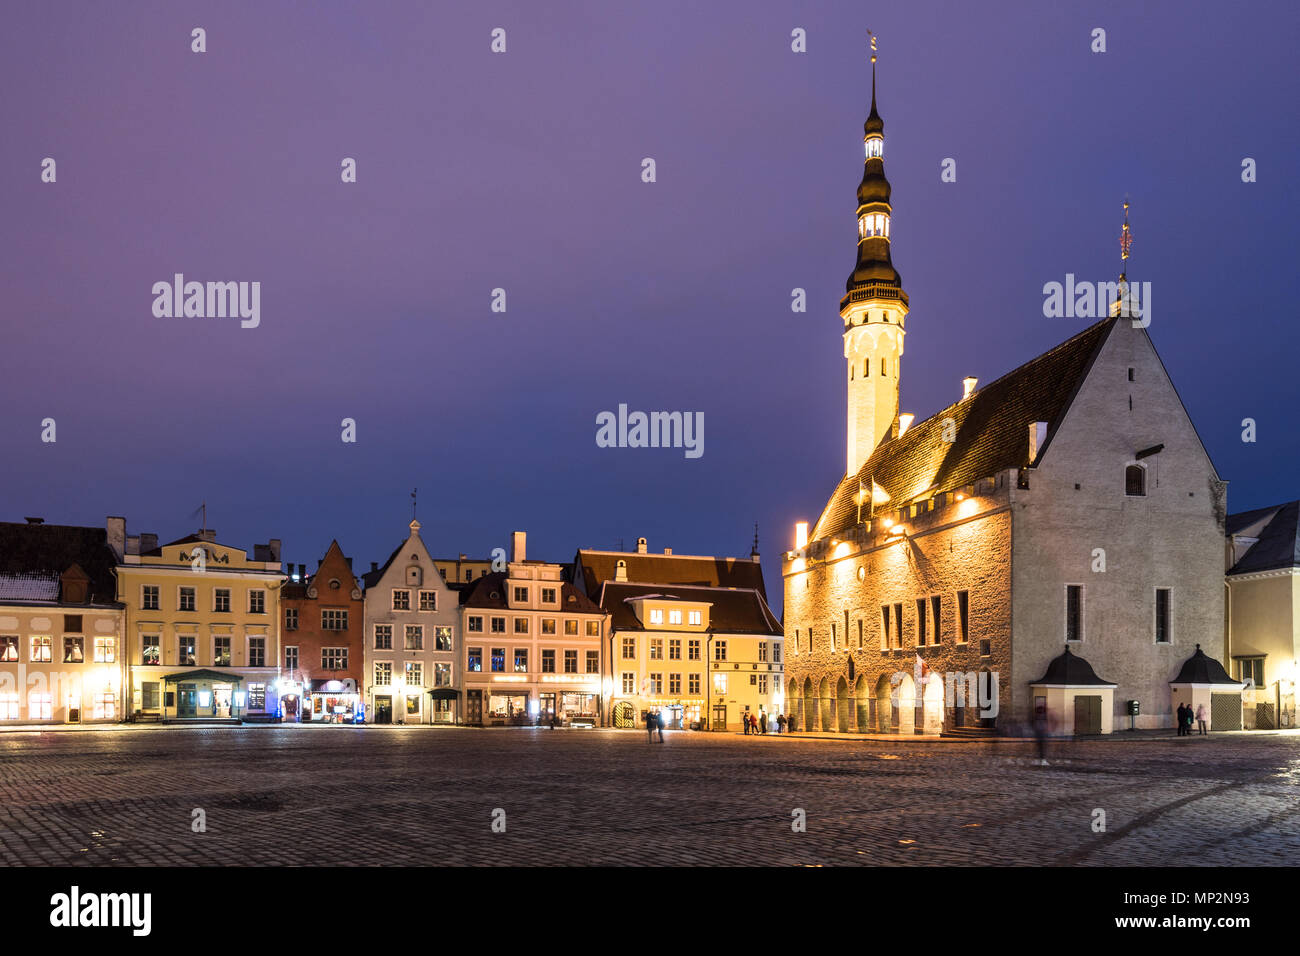 The Tallin gothic Town Hall building on the main old town square at night in Estonia capital city in winter. Tallinn is a popular travel destination i Stock Photo